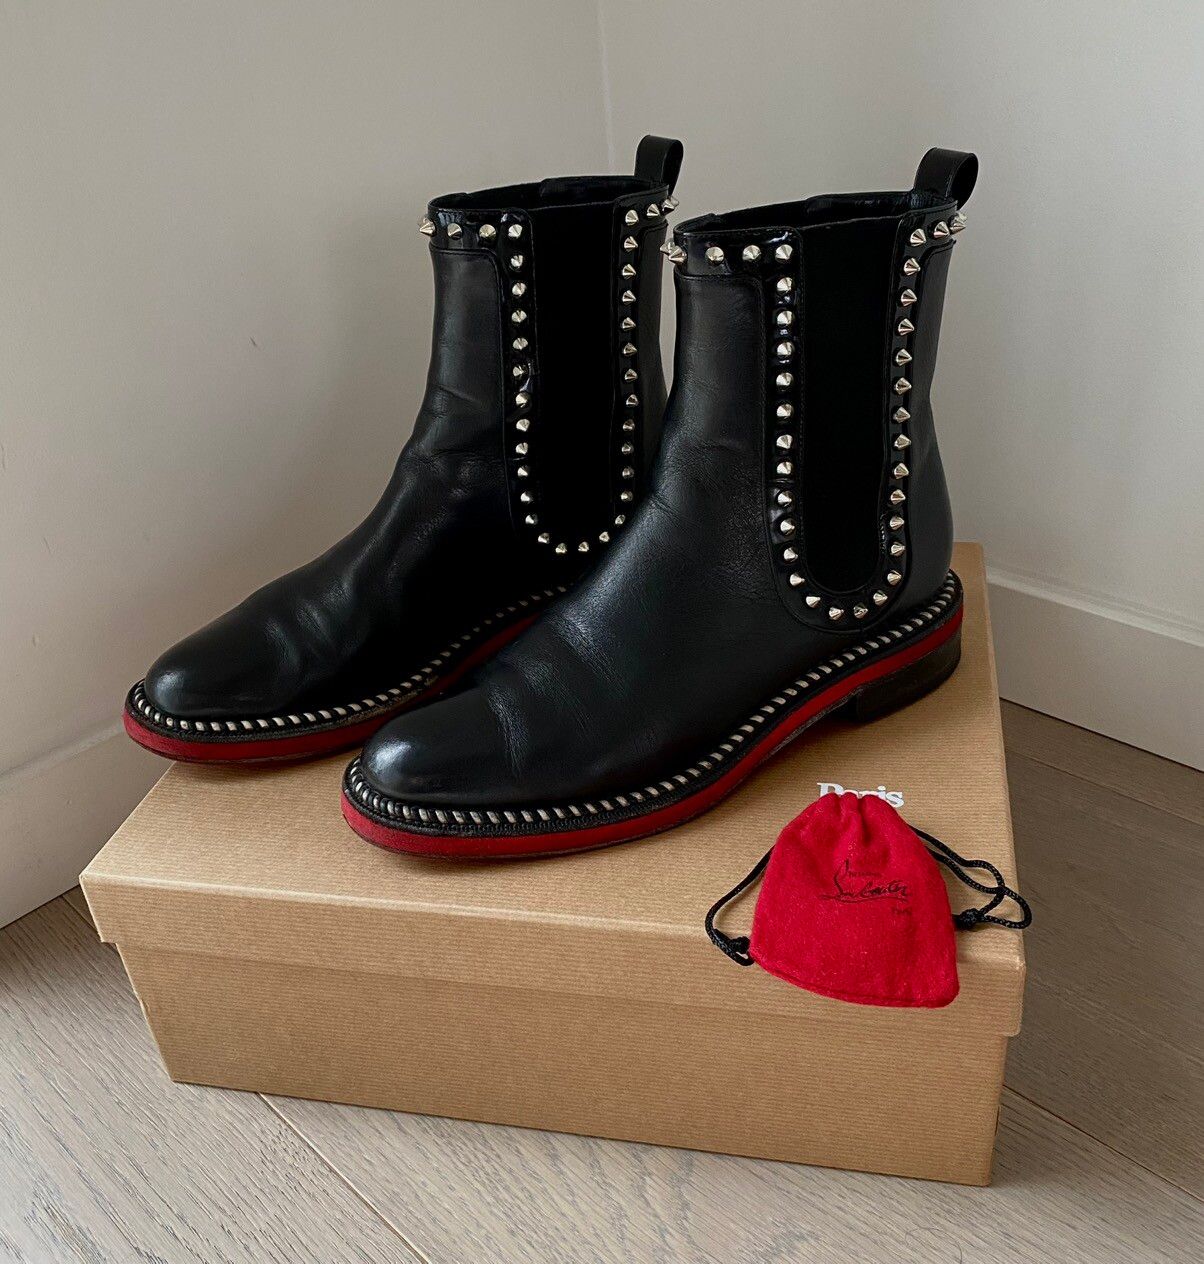 Christian Louboutin Notting Hill 25 Studded Leather Chelsea Boots